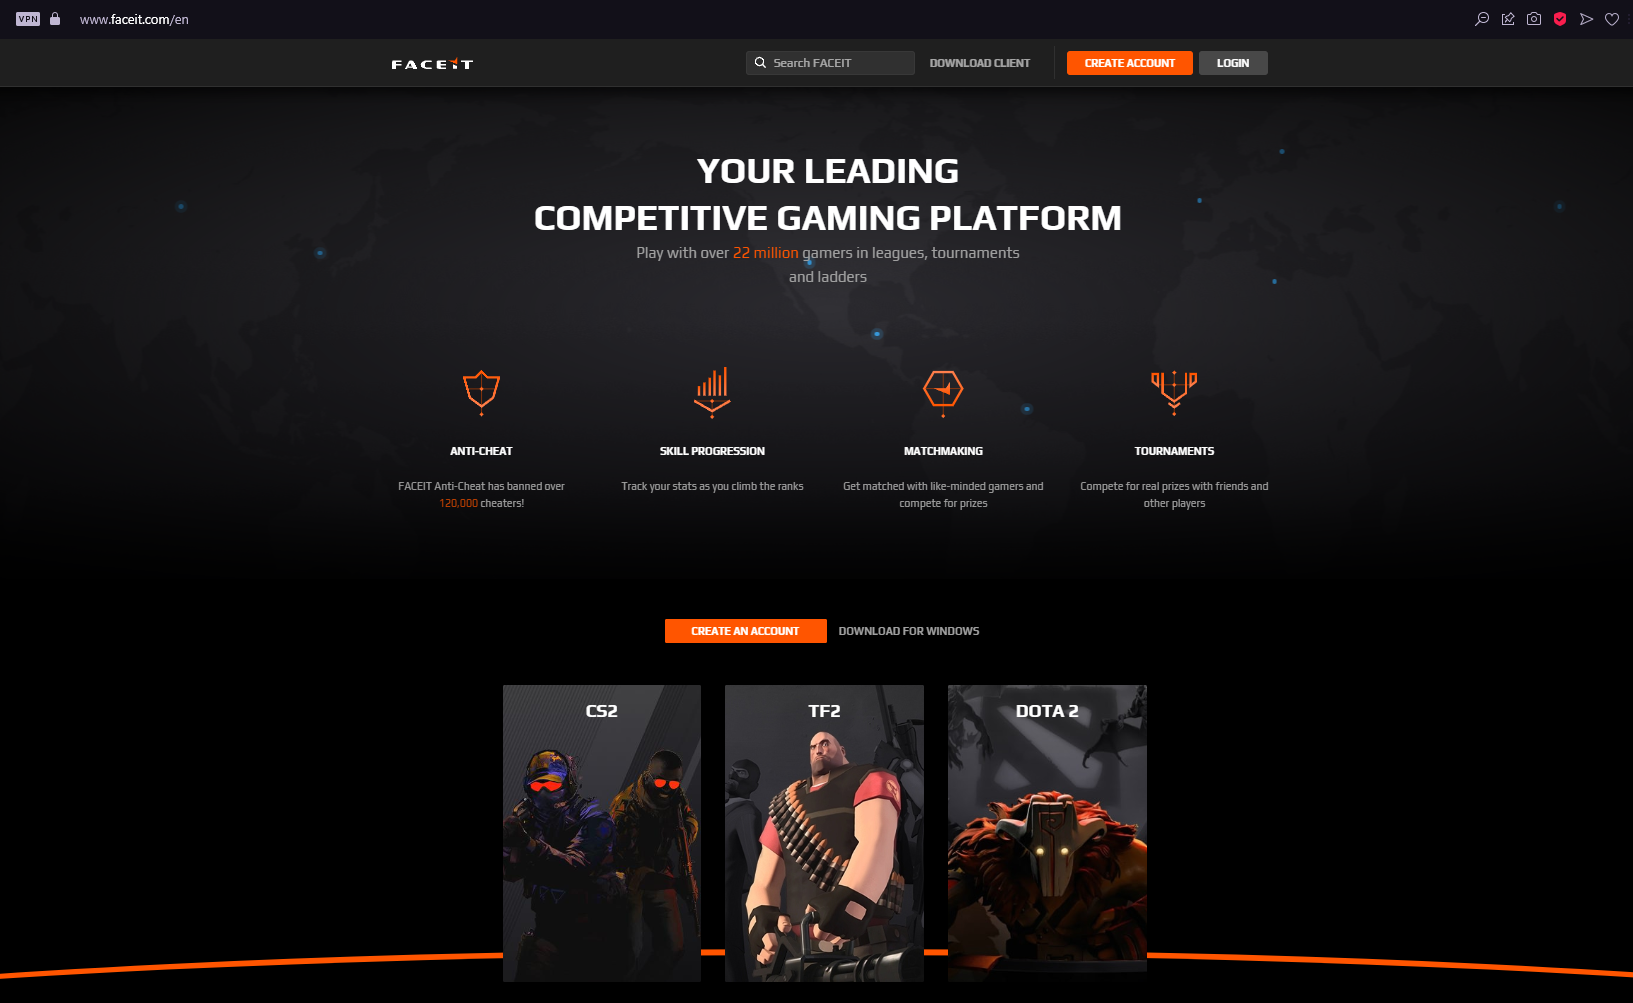 Become familiar with the Faceit ELO Ranking System - Faceit Finder